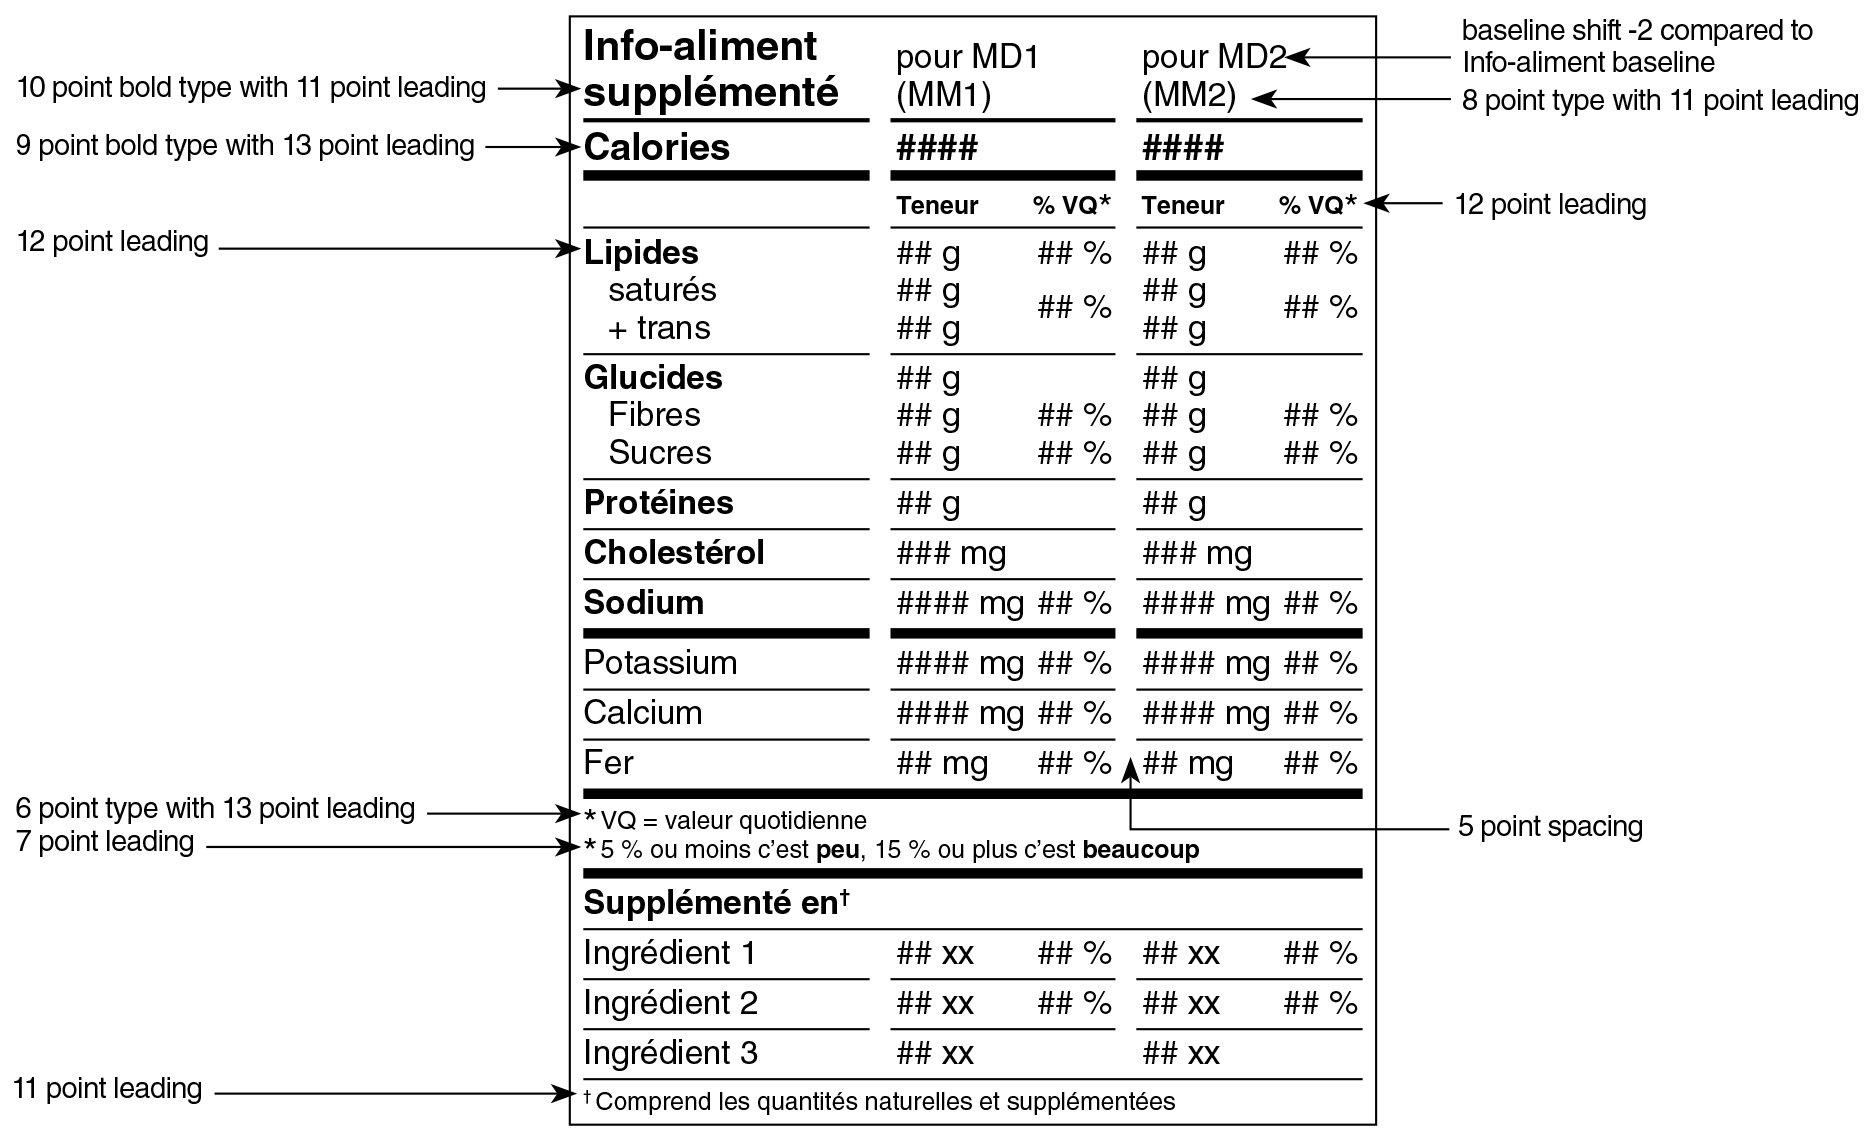 A French Supplemented Food Facts table in aggregate format for two serving sizes surrounded by specifications. Text version below.